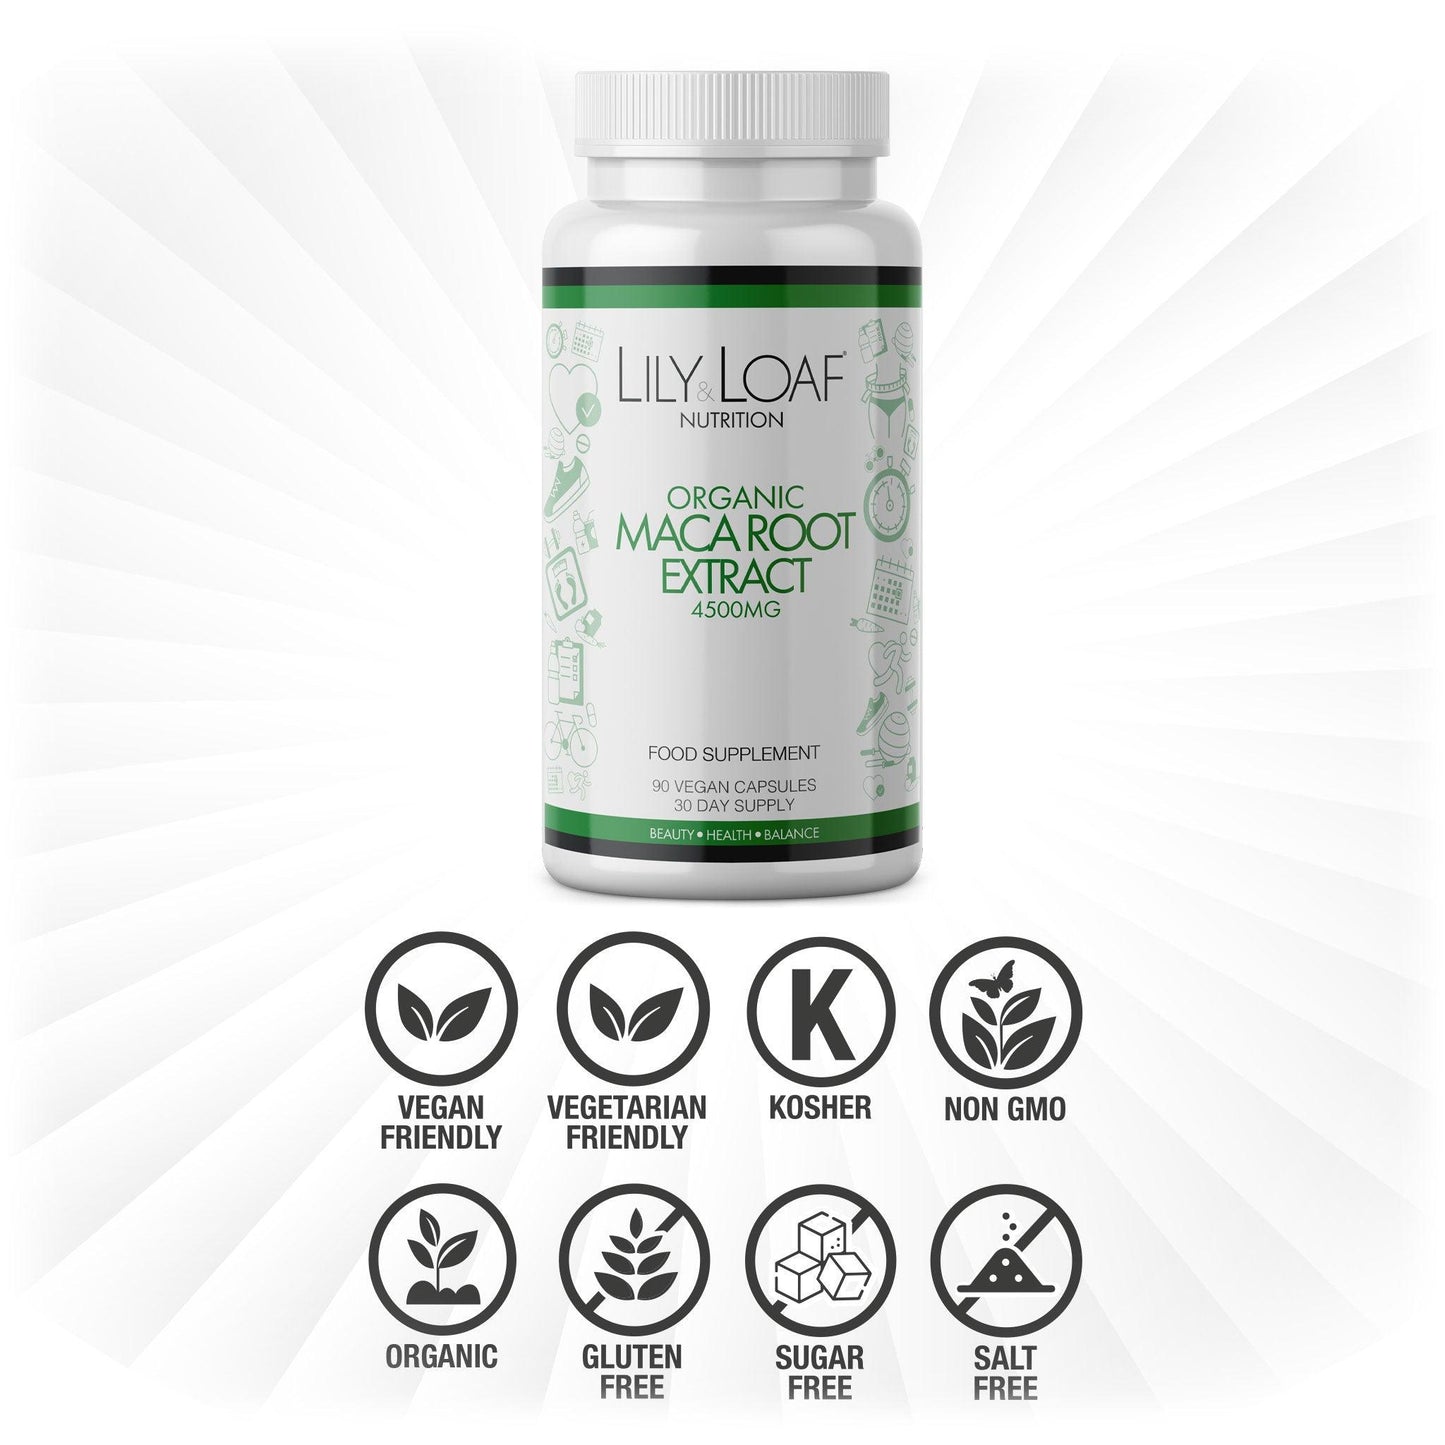 Lily & Loaf Organic Maca Root Extract bottle with 90 vegan capsules, 4500mg, highlighting vegan, vegetarian, kosher, non-GMO, organic, gluten-free, sugar-free, and salt-free features.